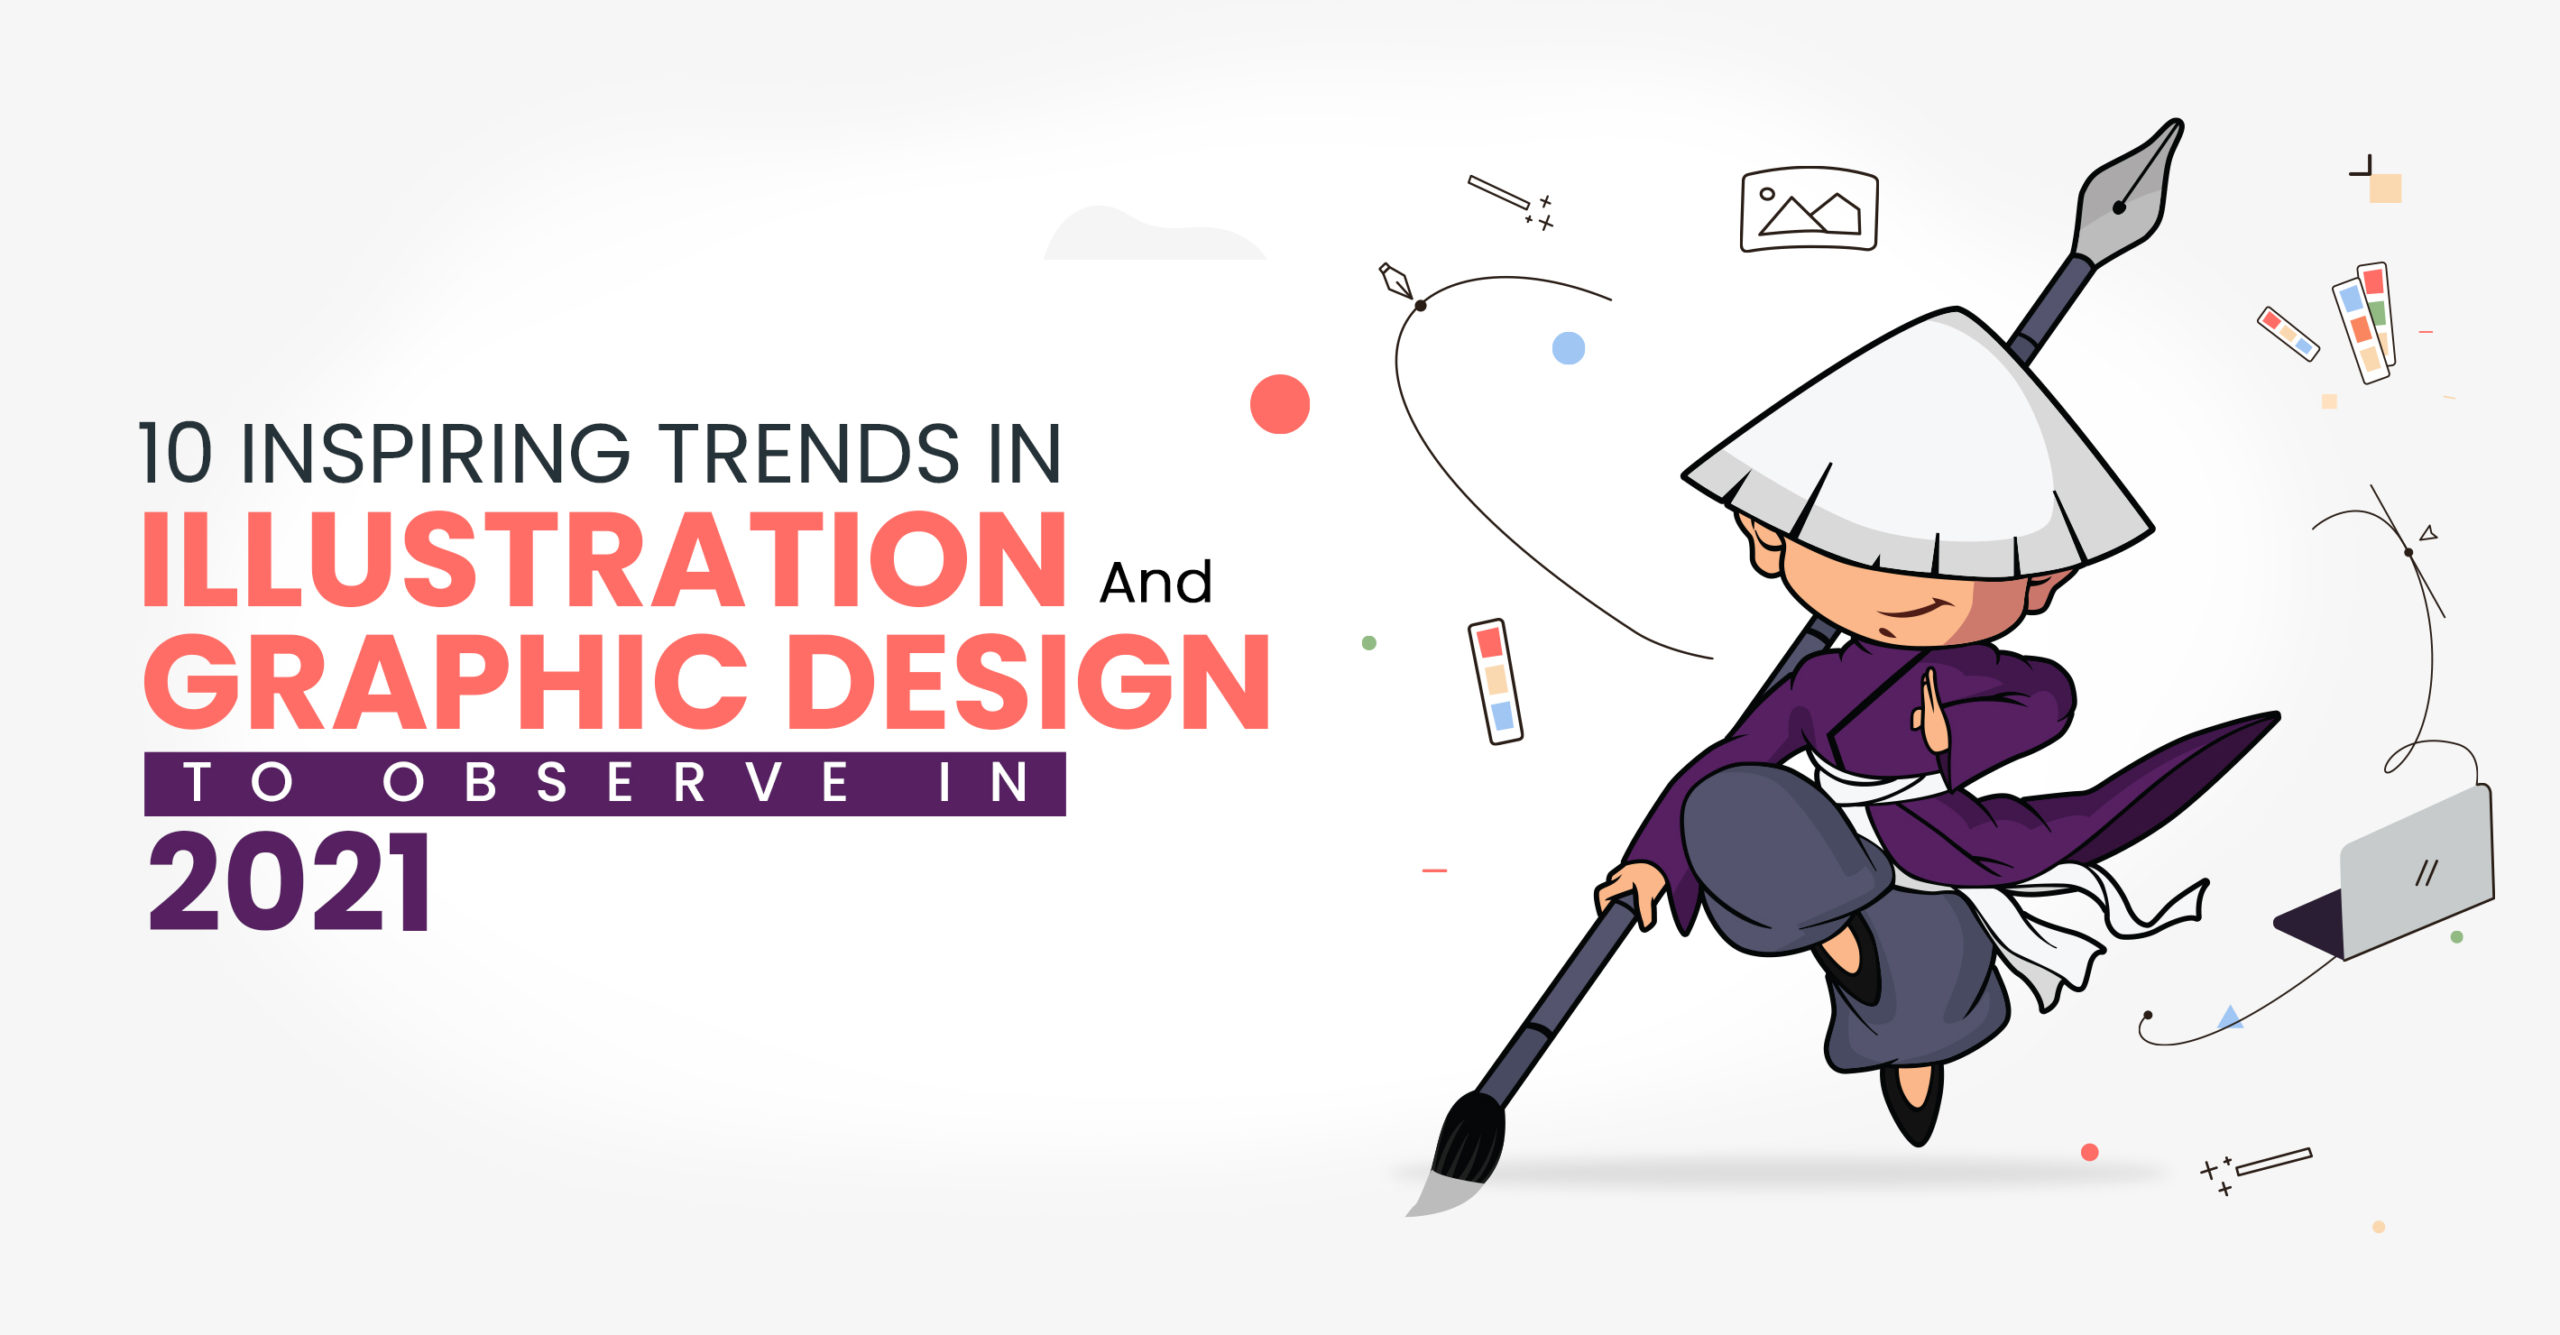 Trends In Illustration And Graphic Design